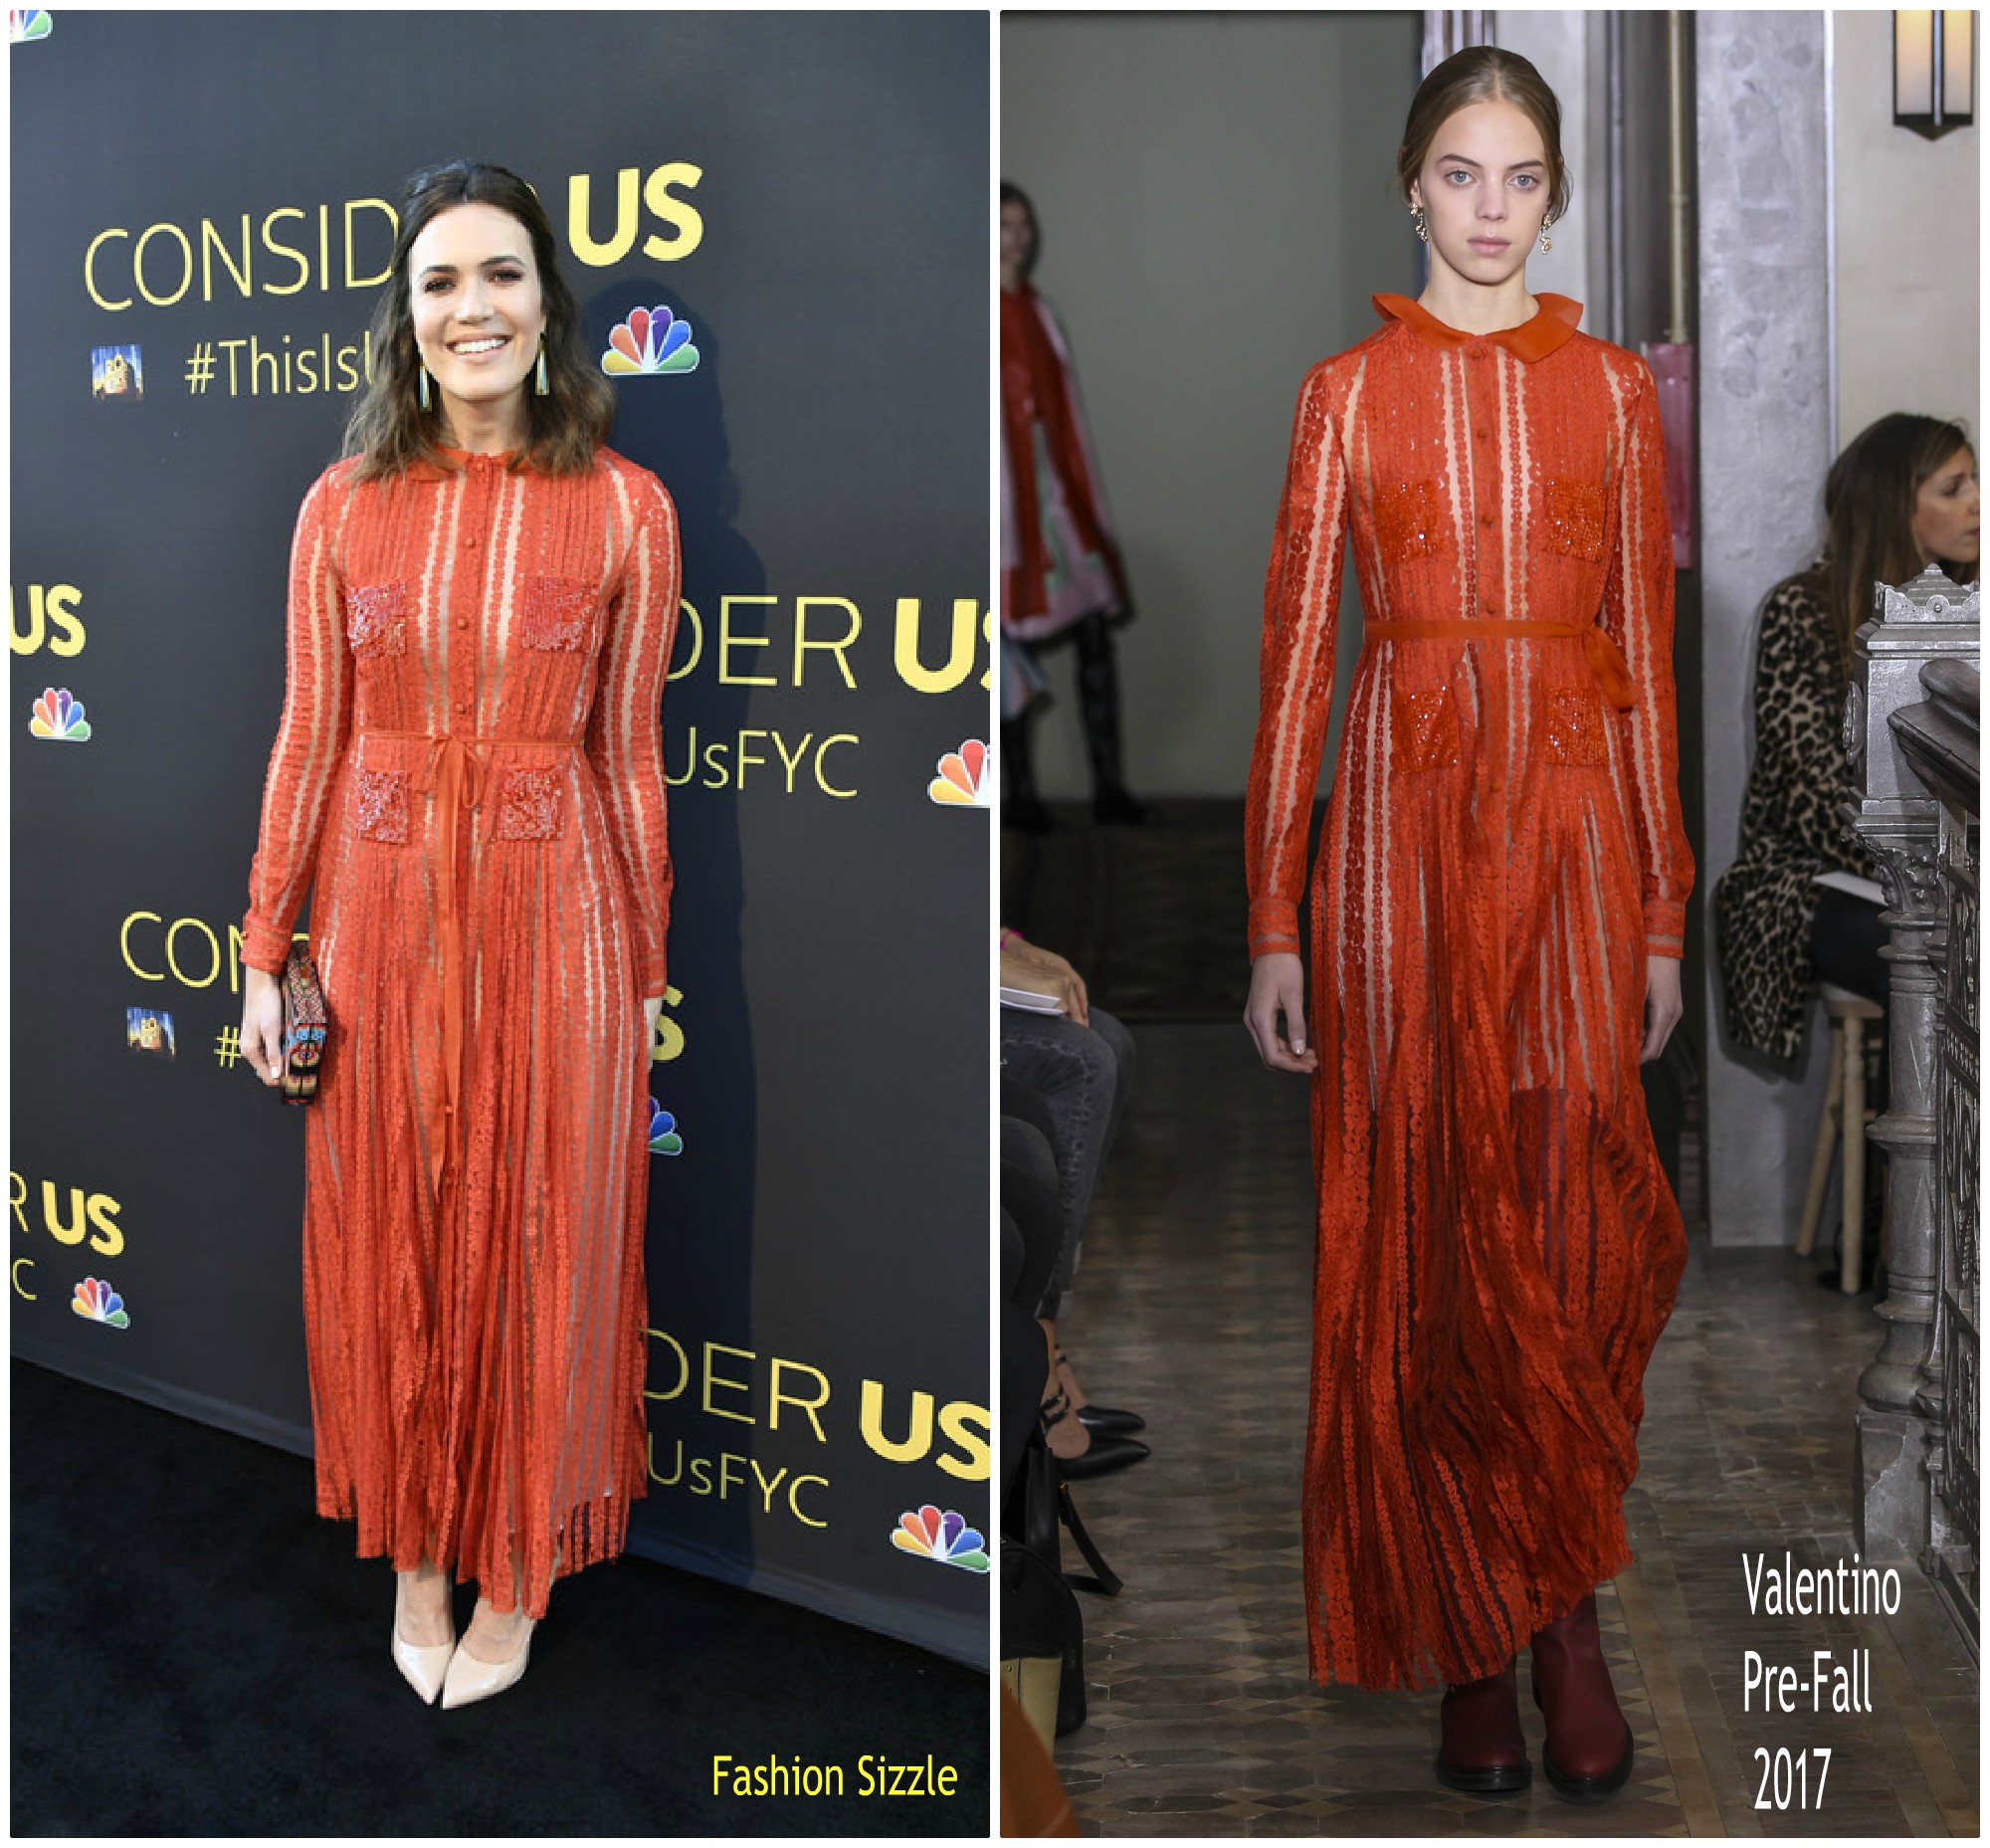 mandy-moore-in-valentino-this-is-us-fyc-event